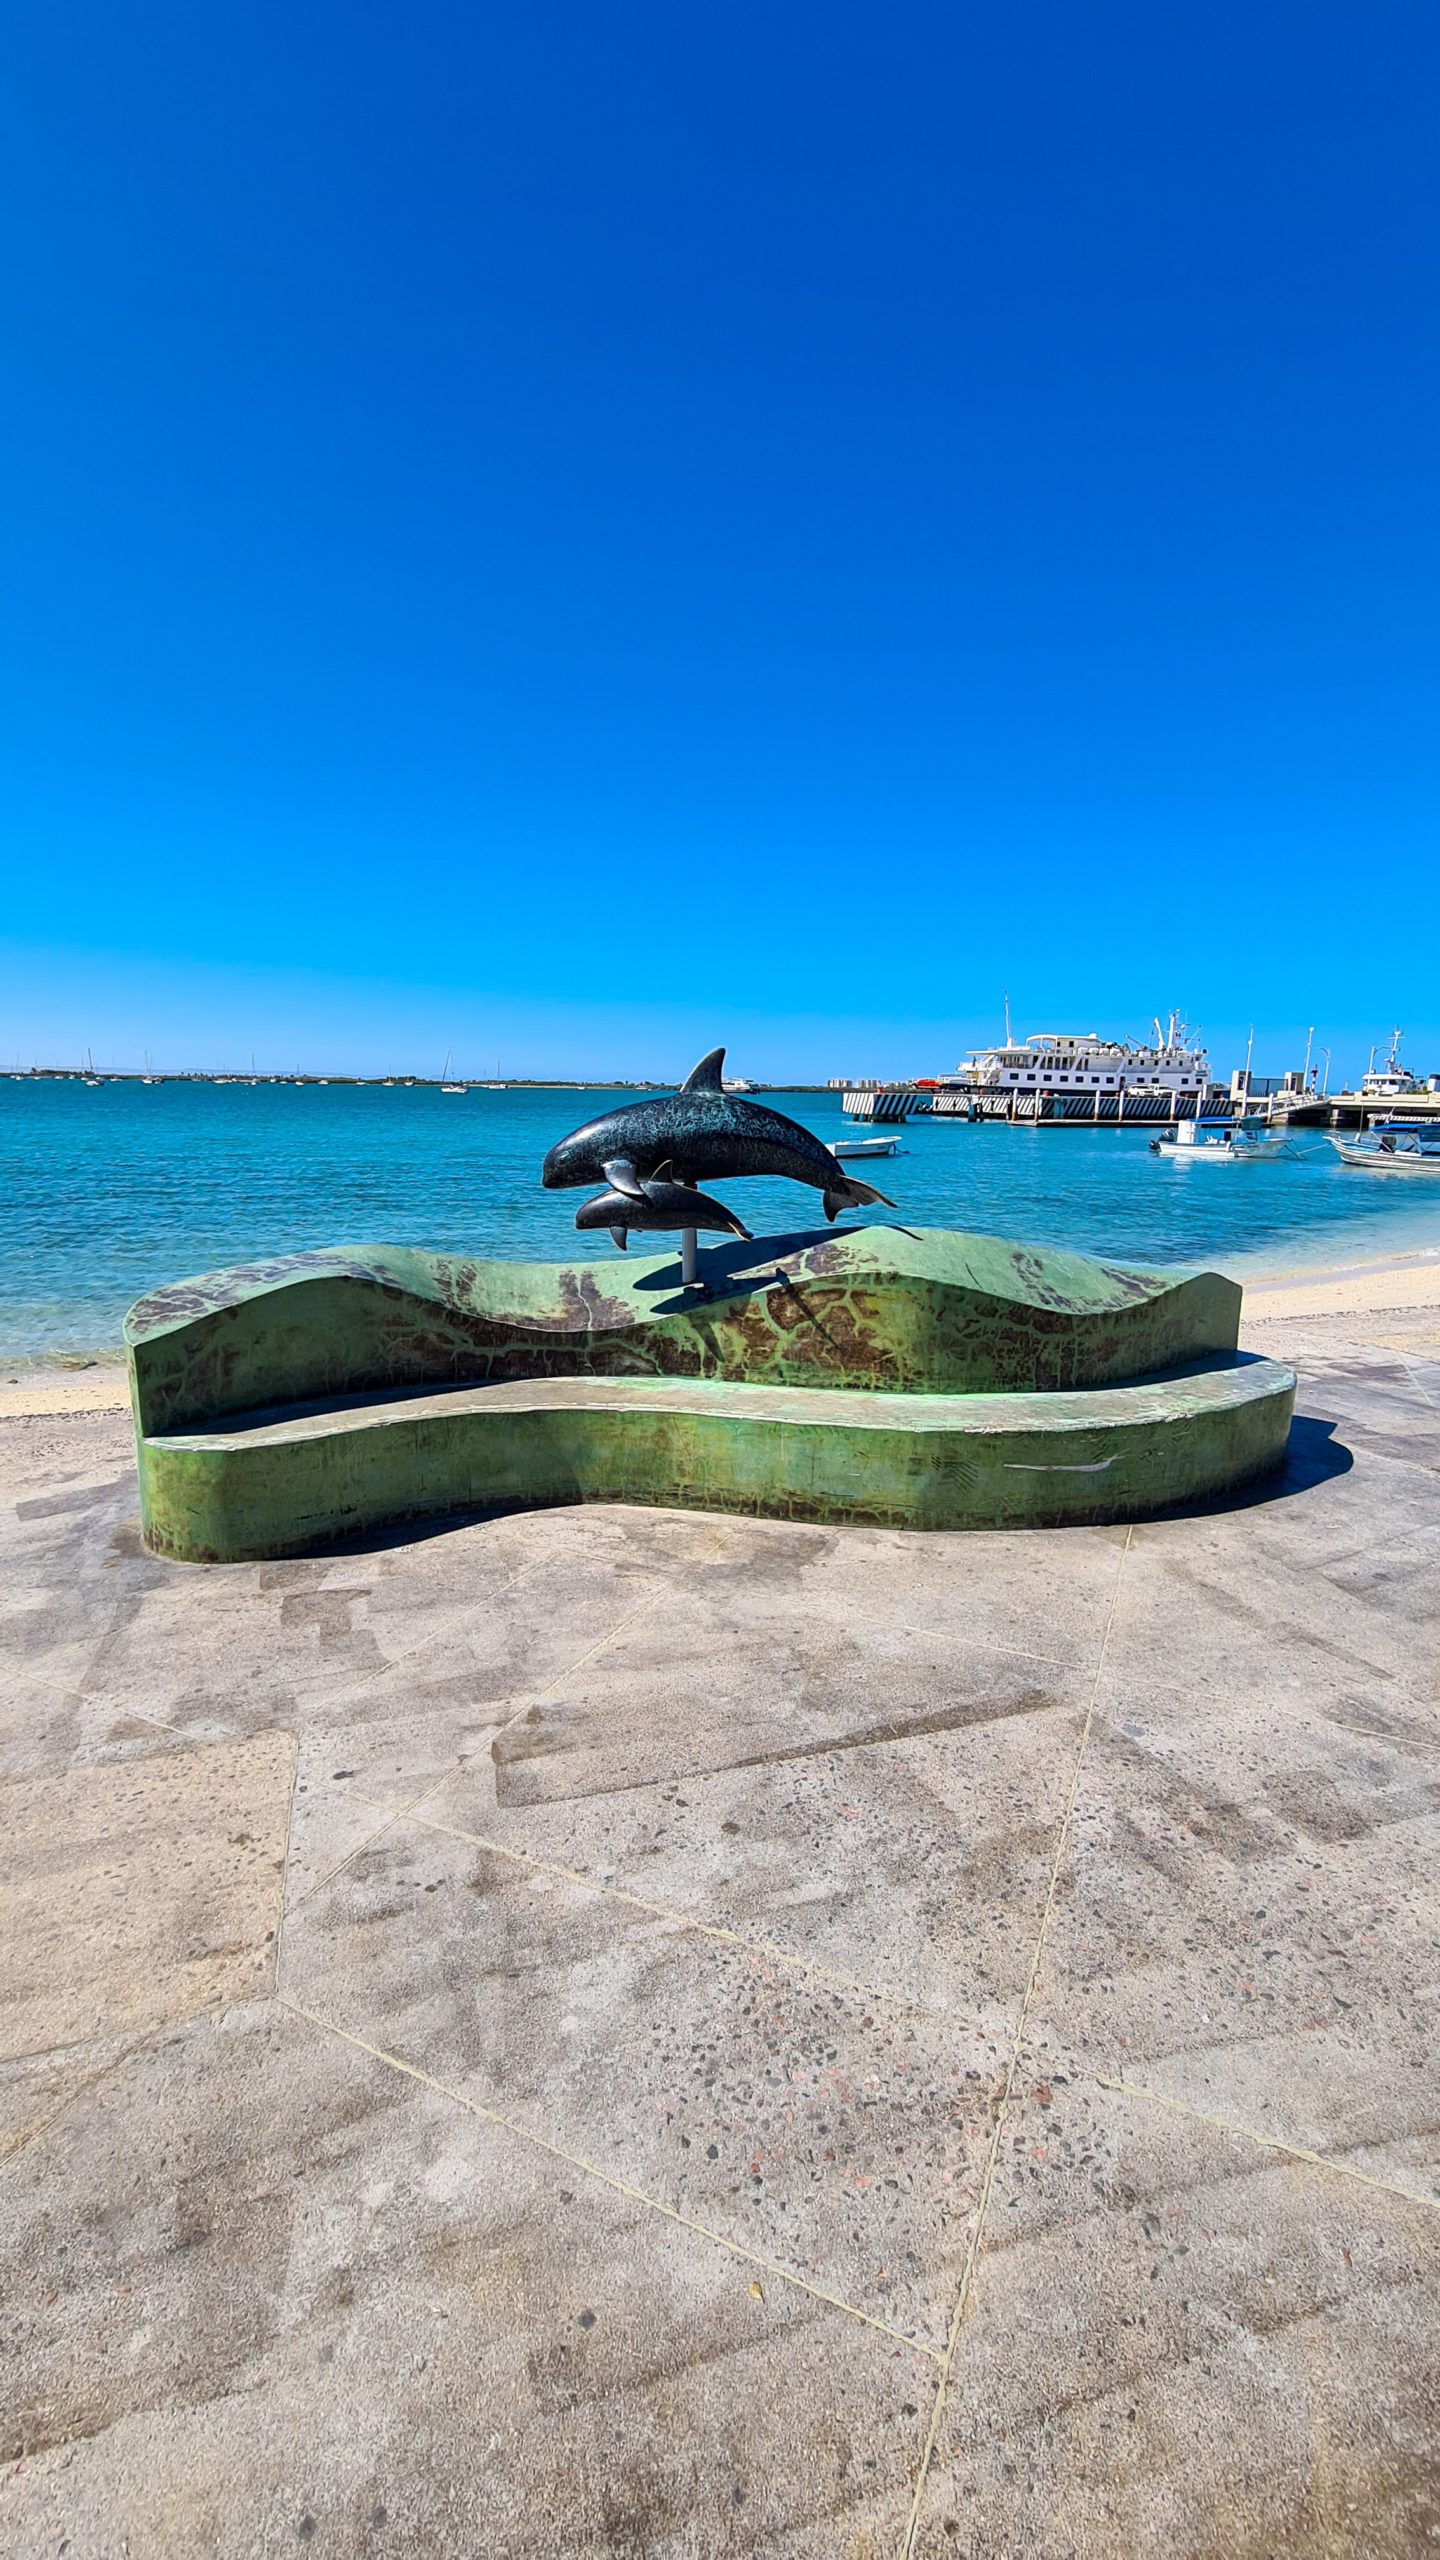 A metal statue of a mother and baby pilot whale swimming side-by-side.